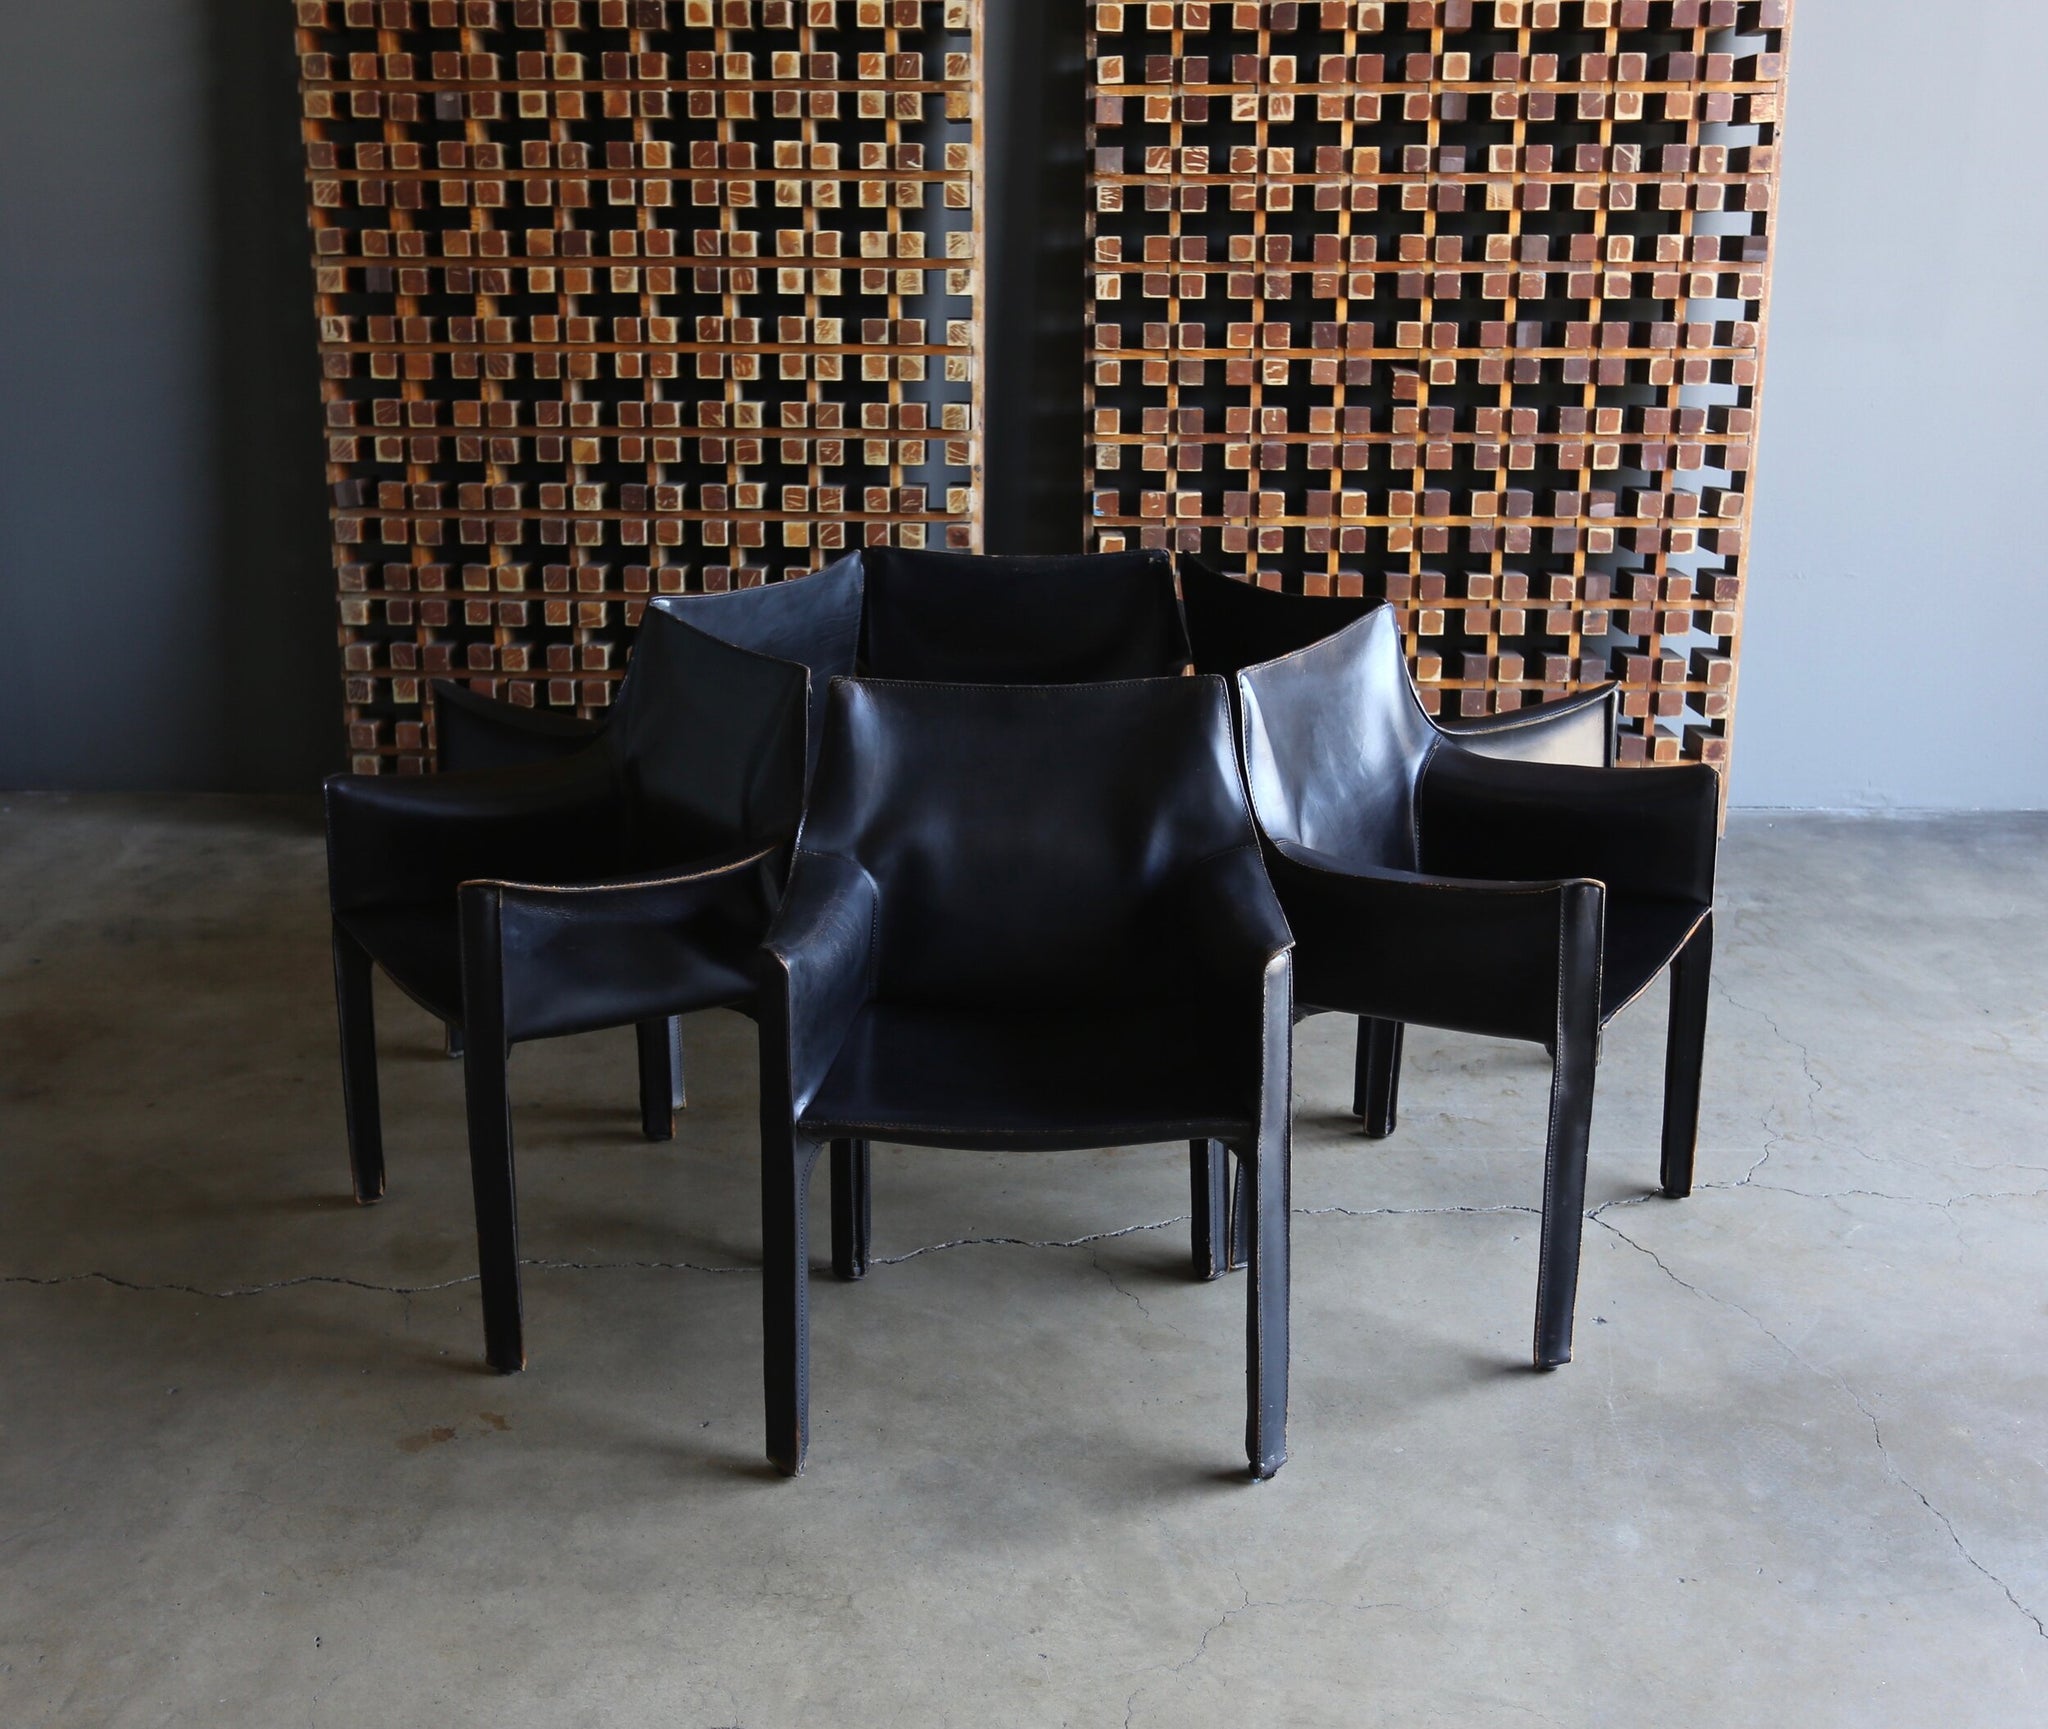 = SOLD = Mario Bellini Set of Six Black Leather "Cab" Chairs for Cassina